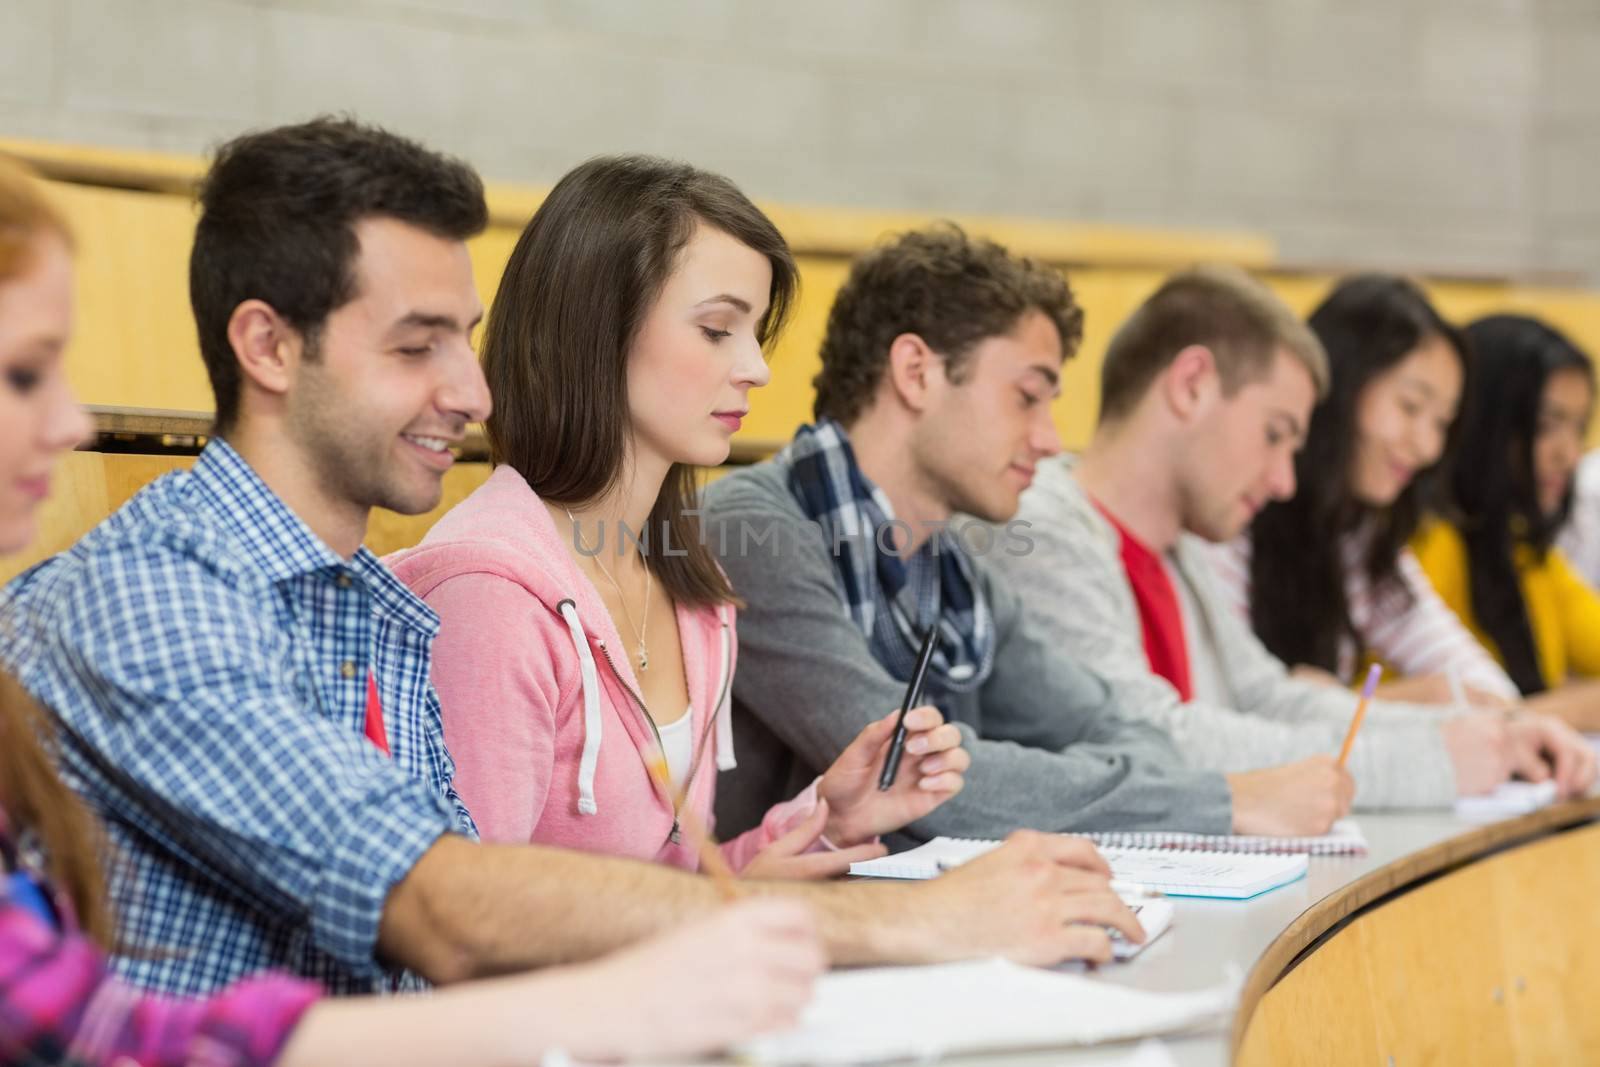 Students writing notes in a row at the lecture hall by Wavebreakmedia